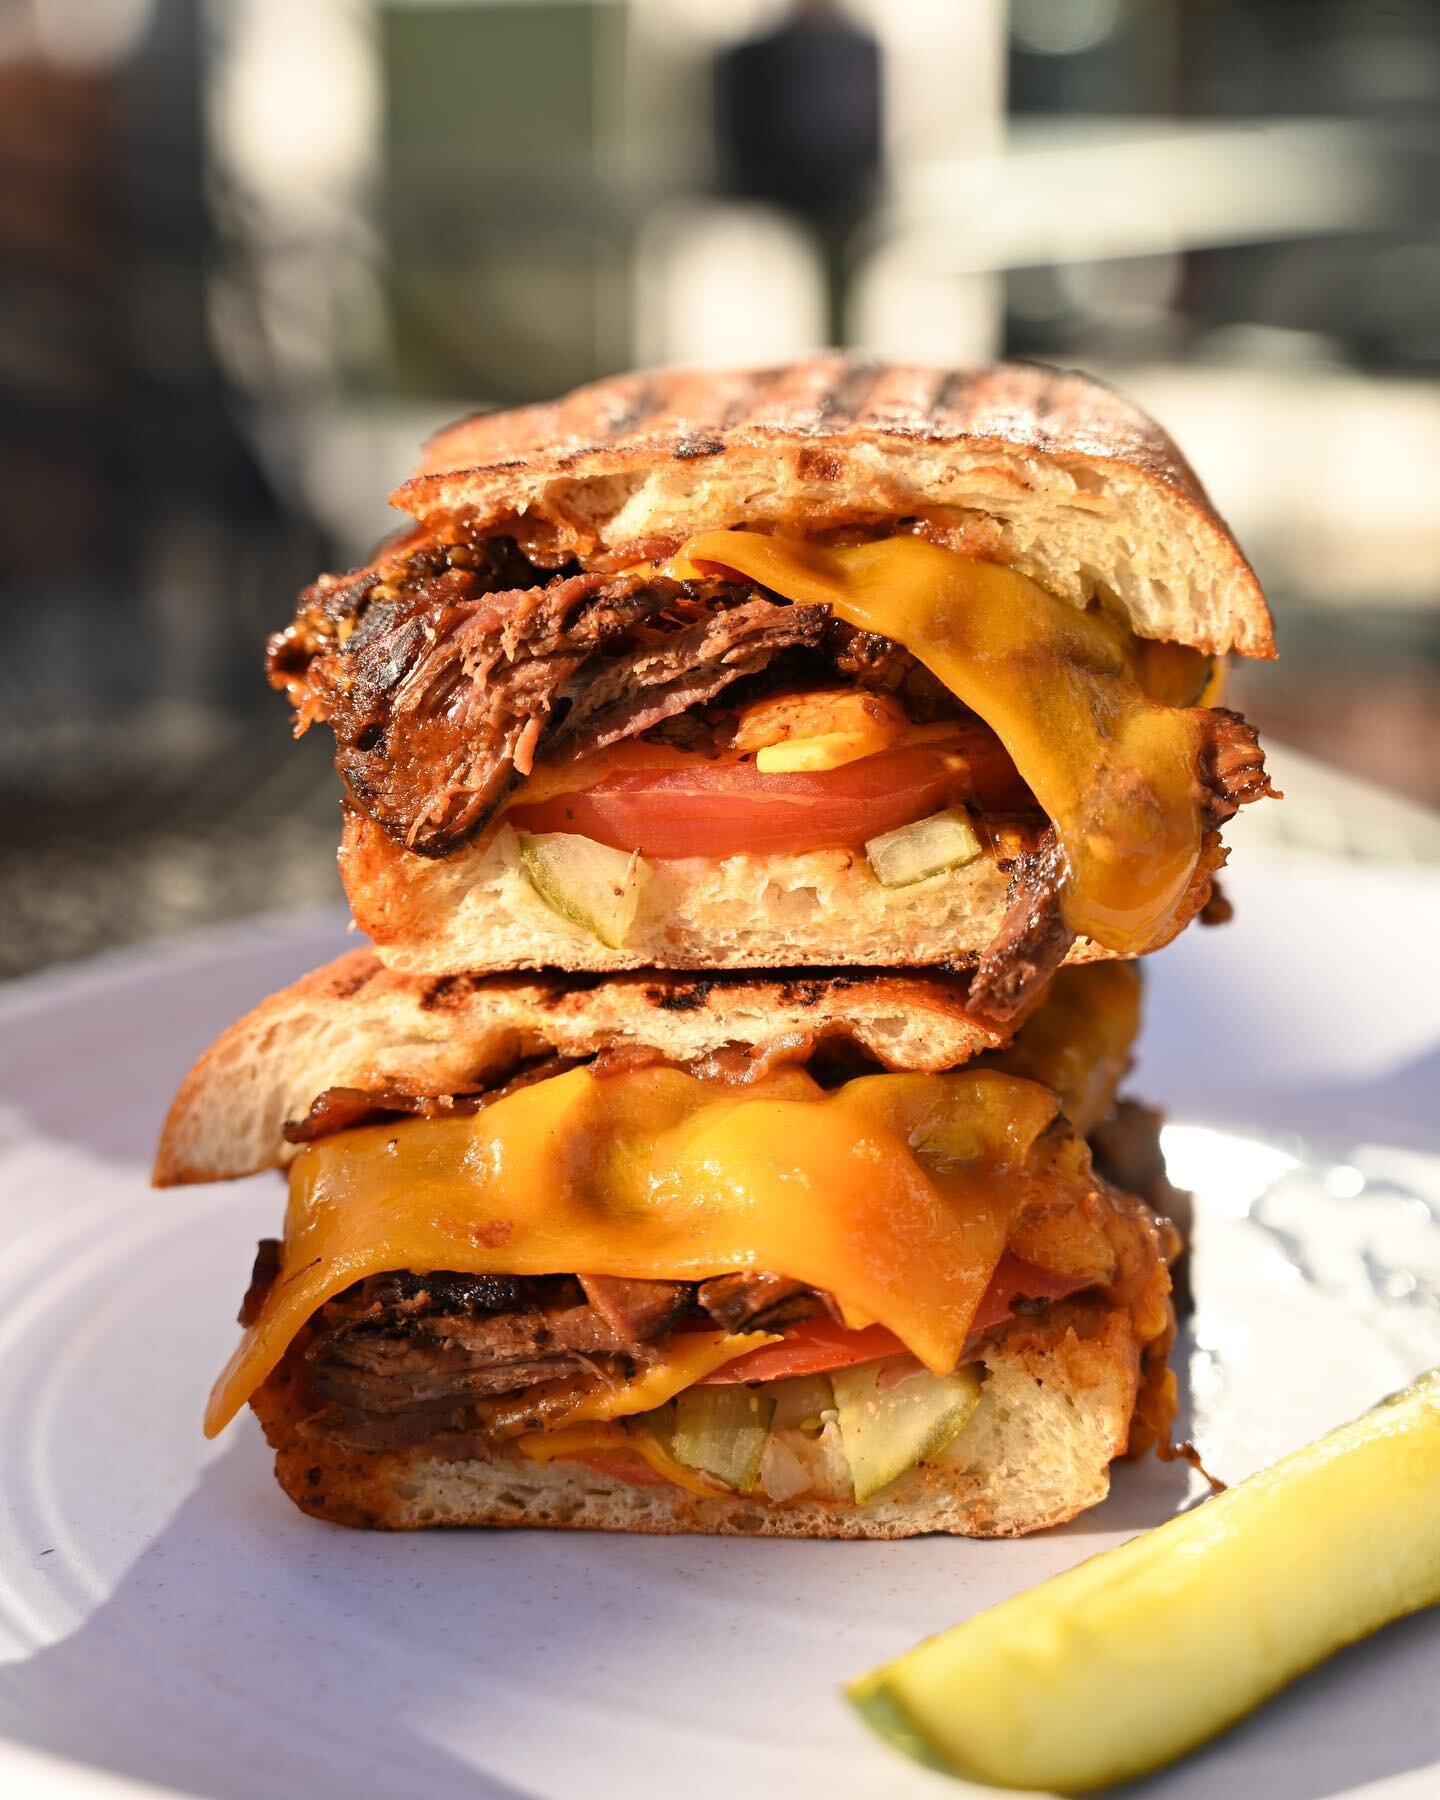 Espresso (yes, espresso!) Barbecue Short Rib Panini 🤩

This week&rsquo;s special has braised short rib, espresso barbecue sauce, diced pickles, cheddar cheese, applewood smoked bacon, and farm fresh tomatoes all pressed on a ciabatta! 

#pressedcafe